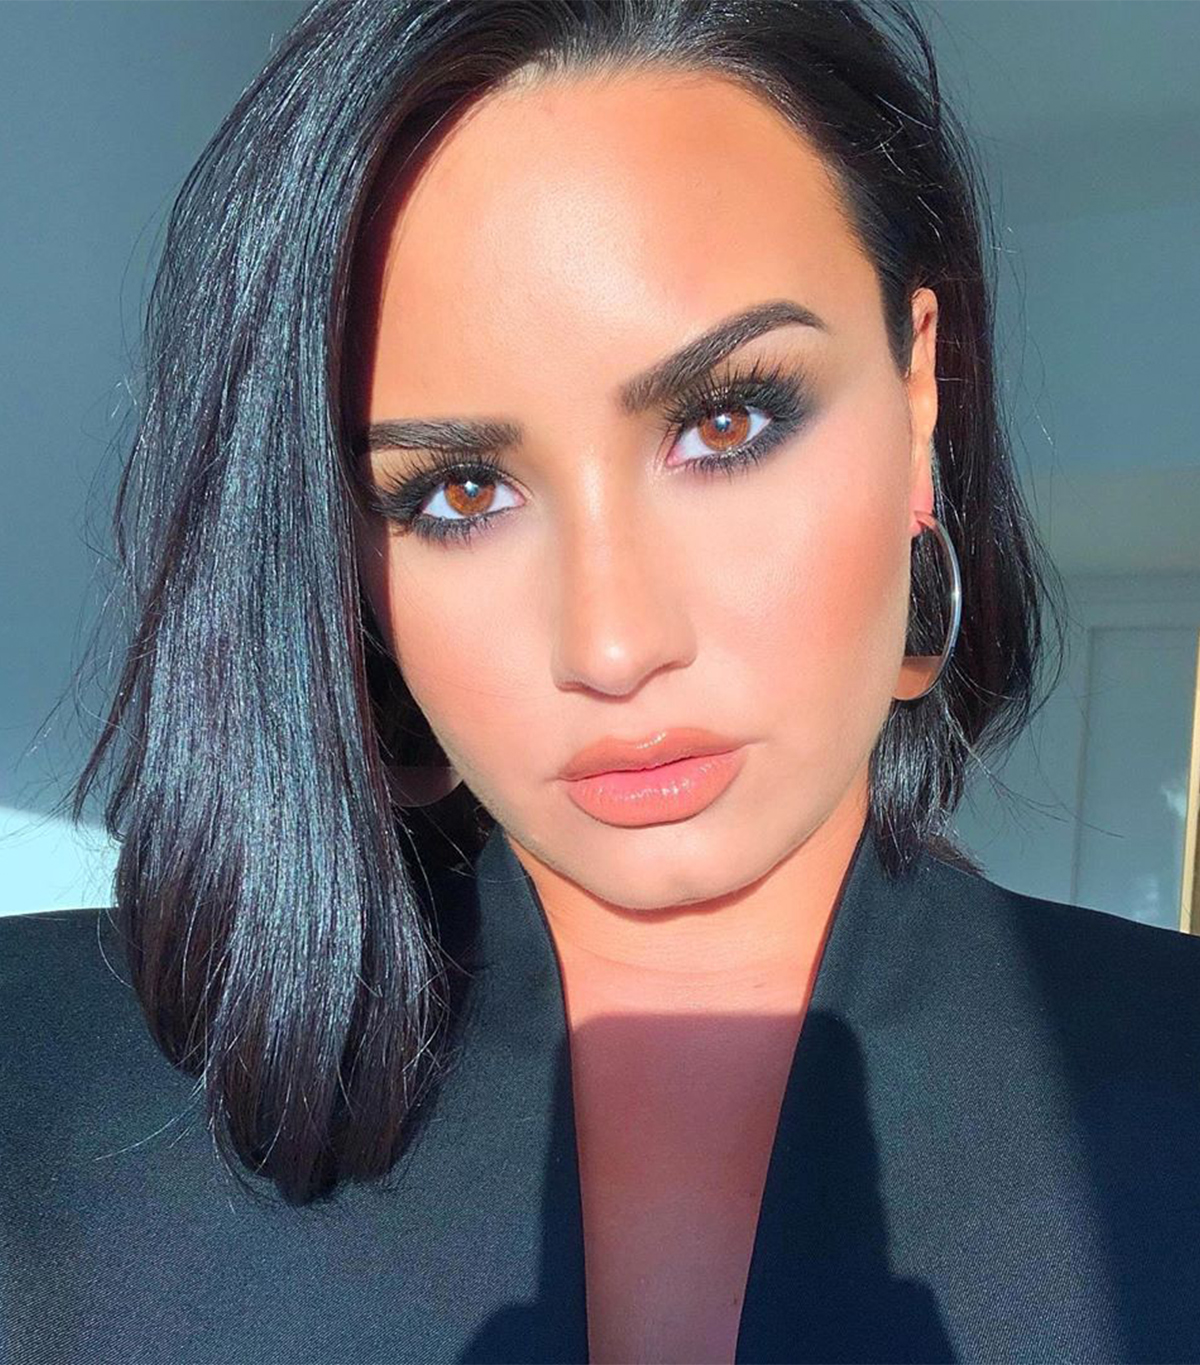 This Is How NYC and L.A. Girls Are Dyeing Their Hair This Winter: Demi Lovato